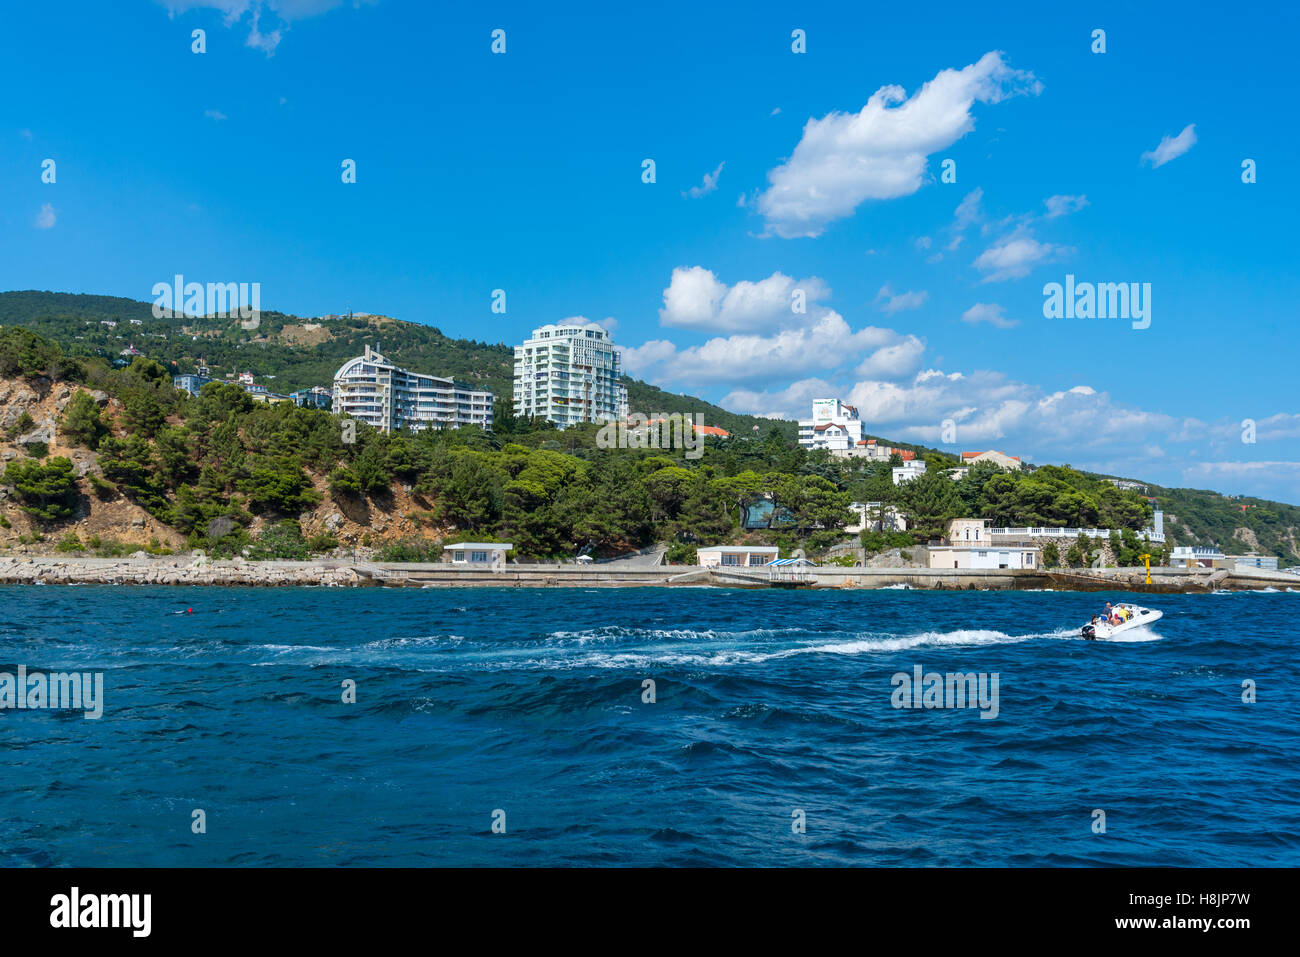 Southern coast of Crimea, view from the sea Stock Photo